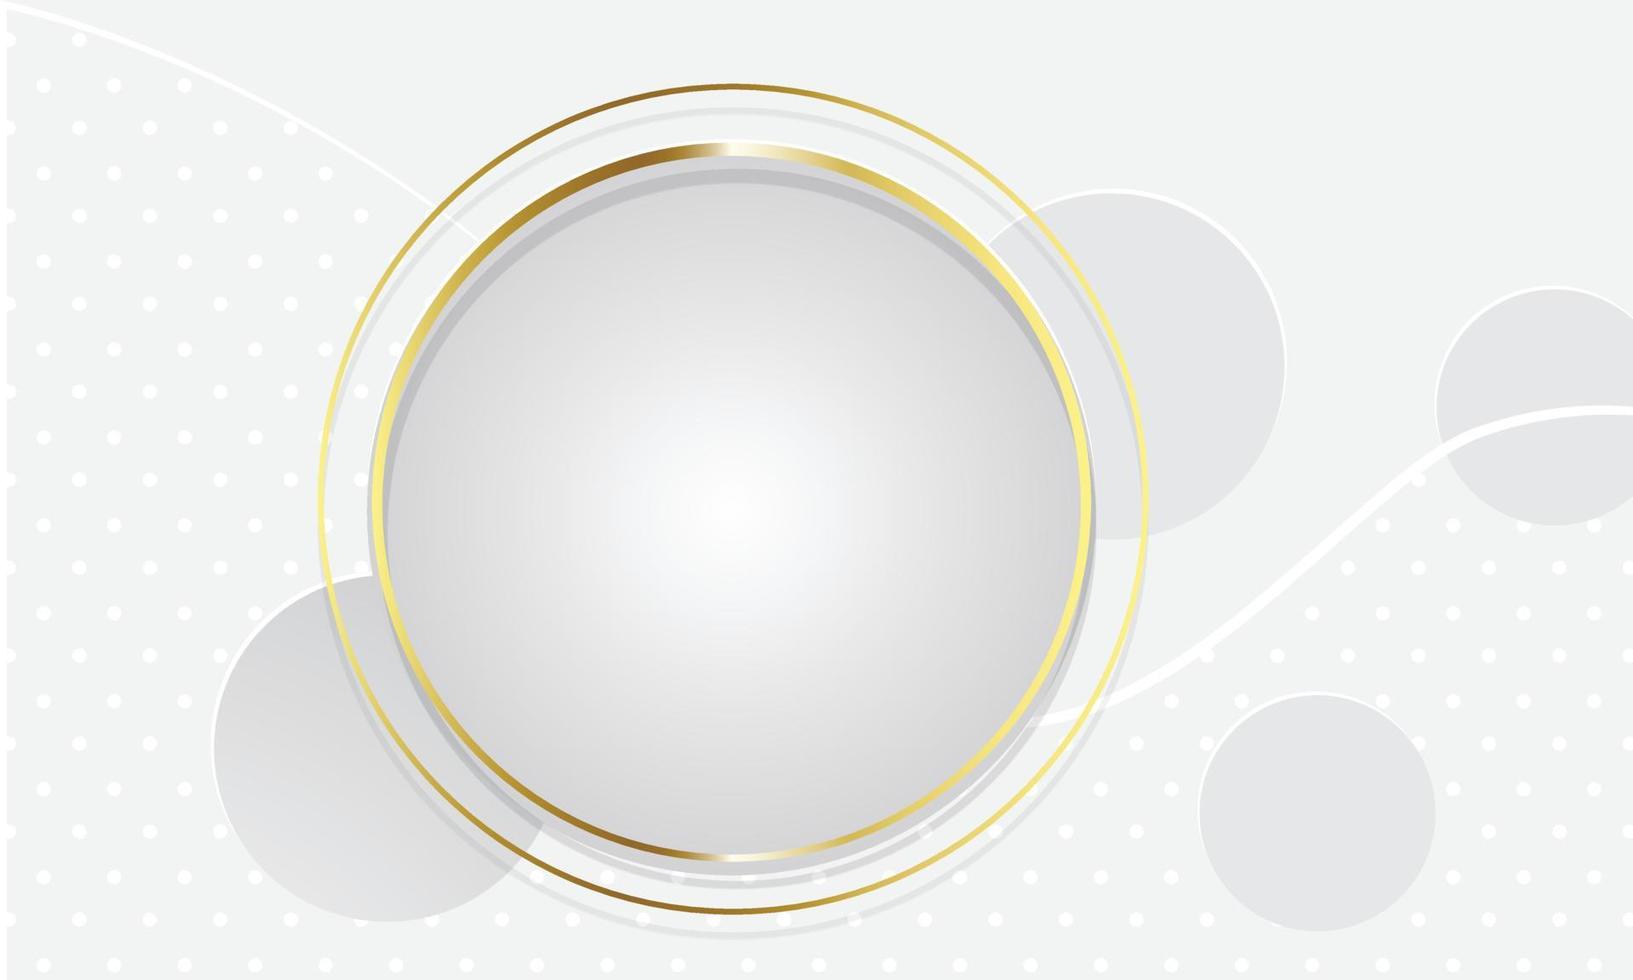 Abstract white and gold circle shapes background vector illustration